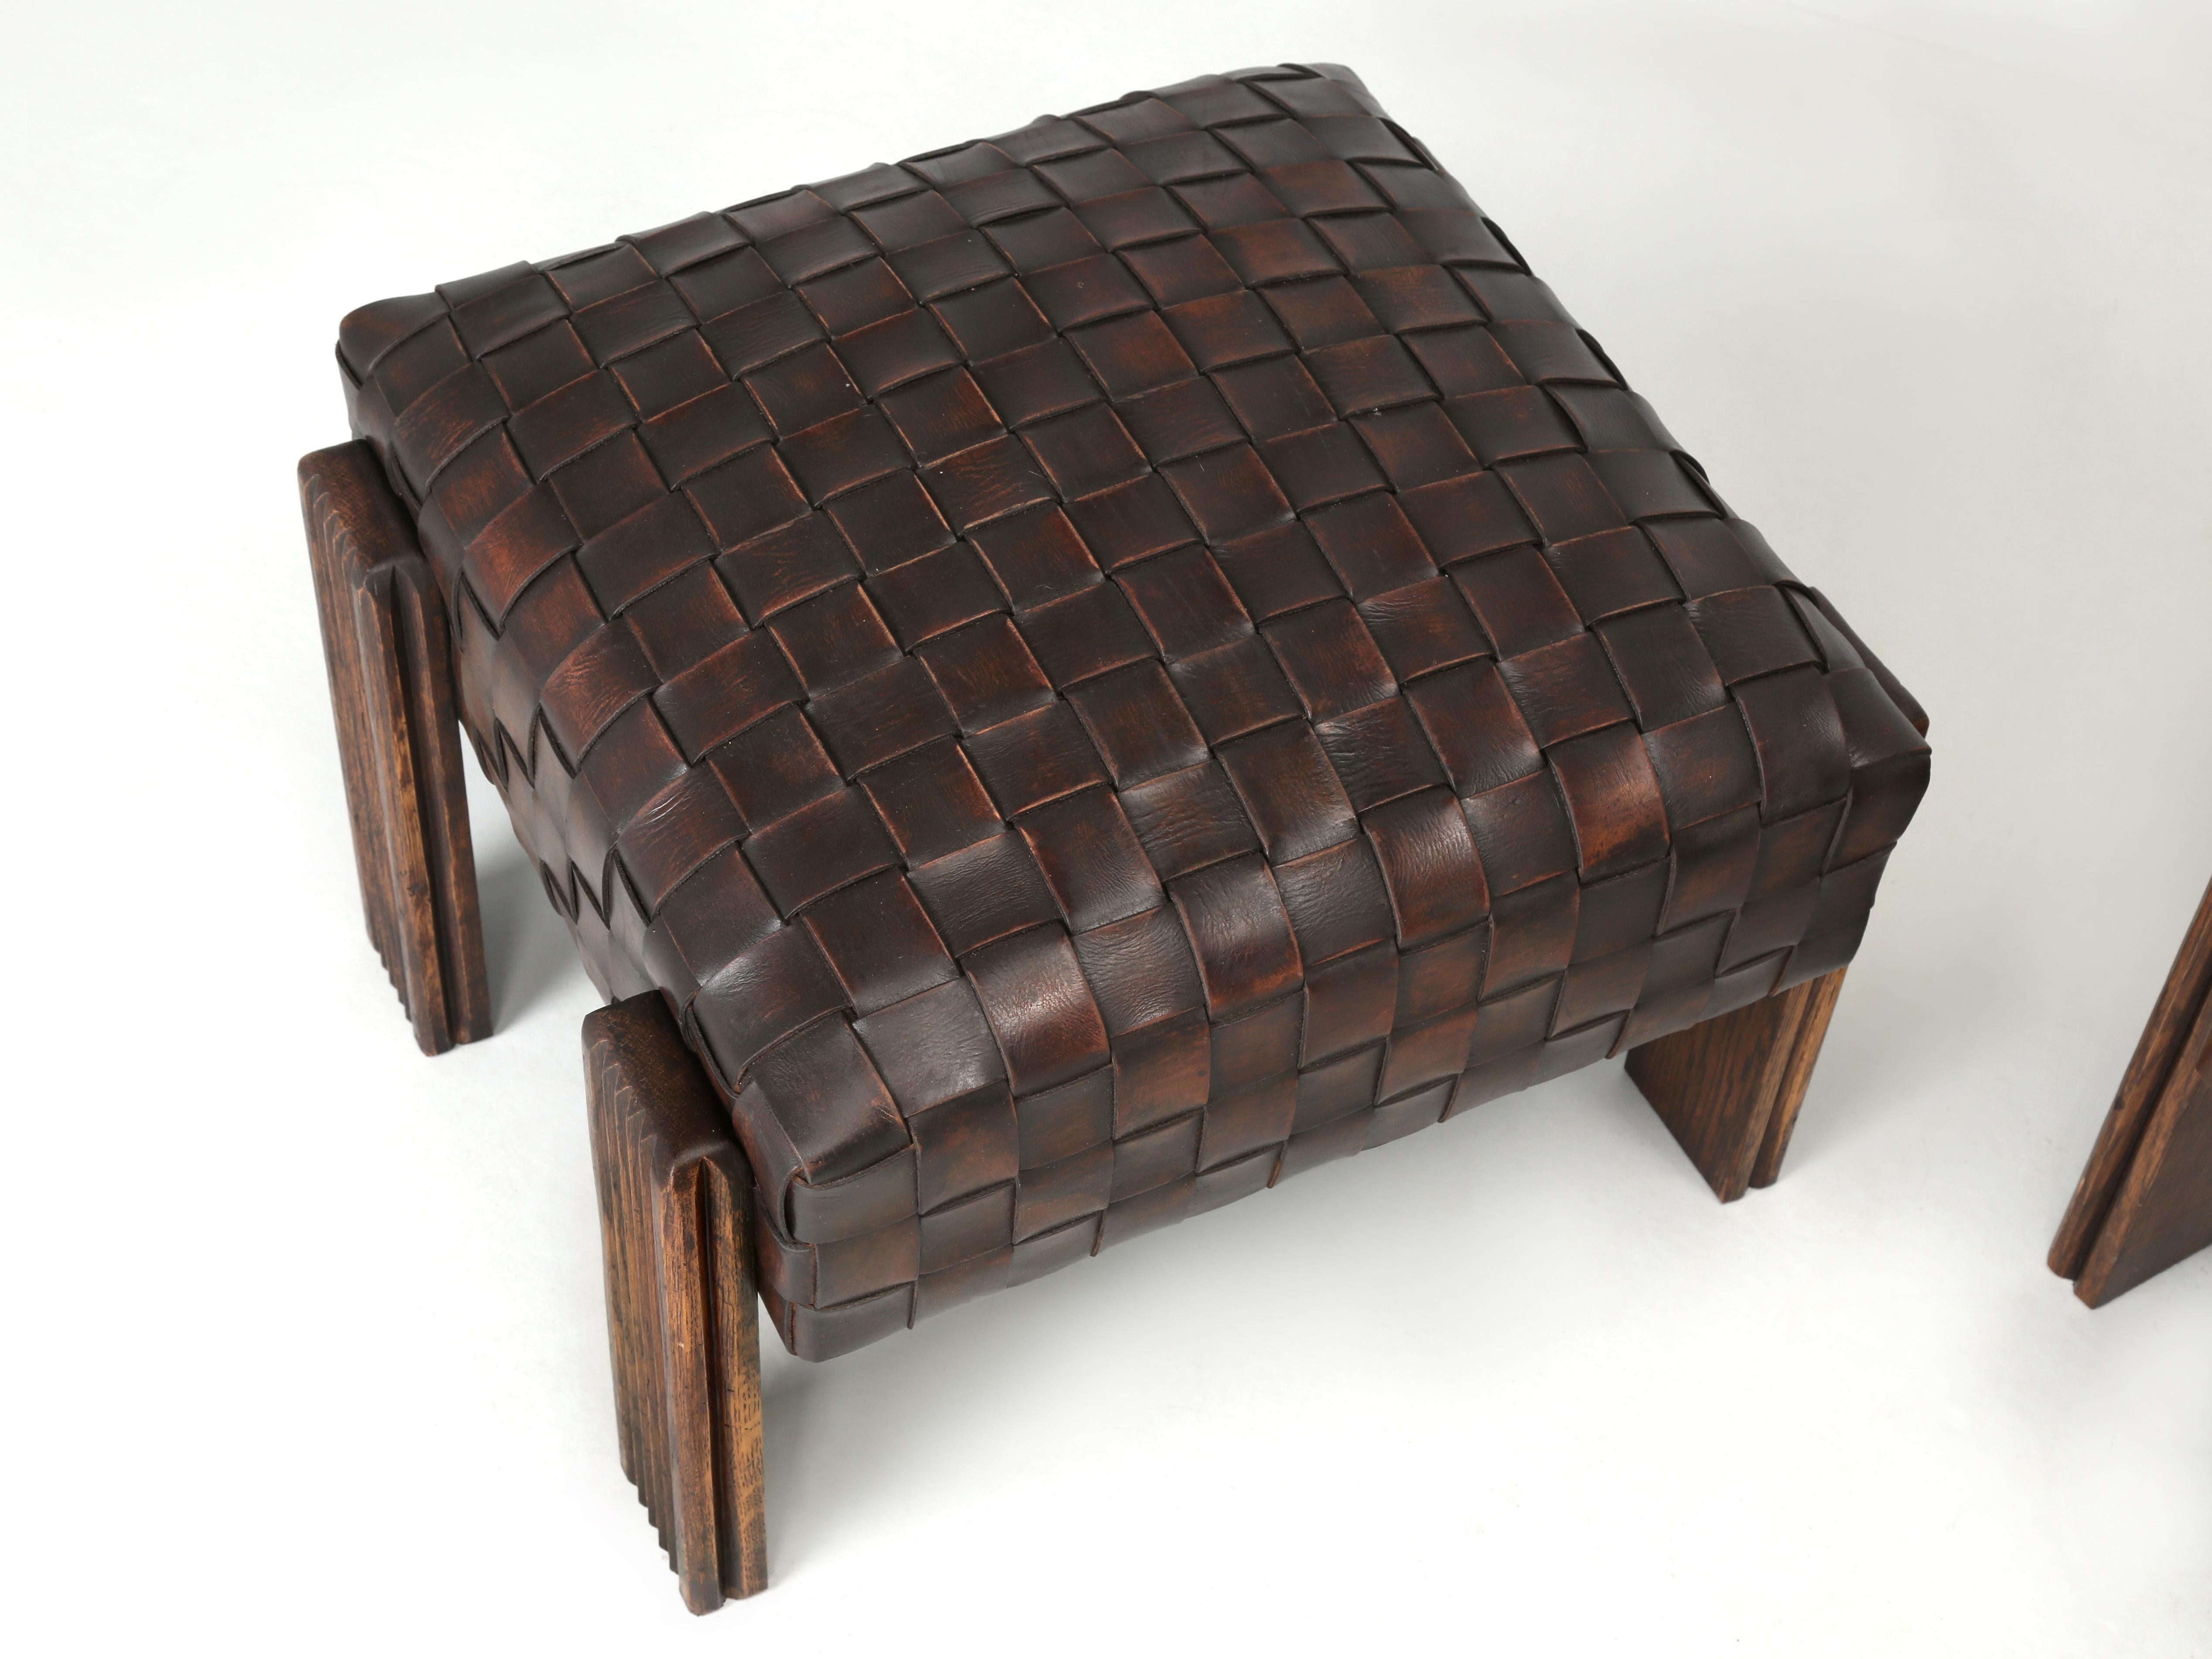 Woven Leather Ottoman of Foot Stool inspired by a pair of c1910-1920 French Woven Leather Club Chairs, that we also produce in house and offer on 1stdibs. The process to create Woven Leather Ottomans is very time consuming as one might imagine and